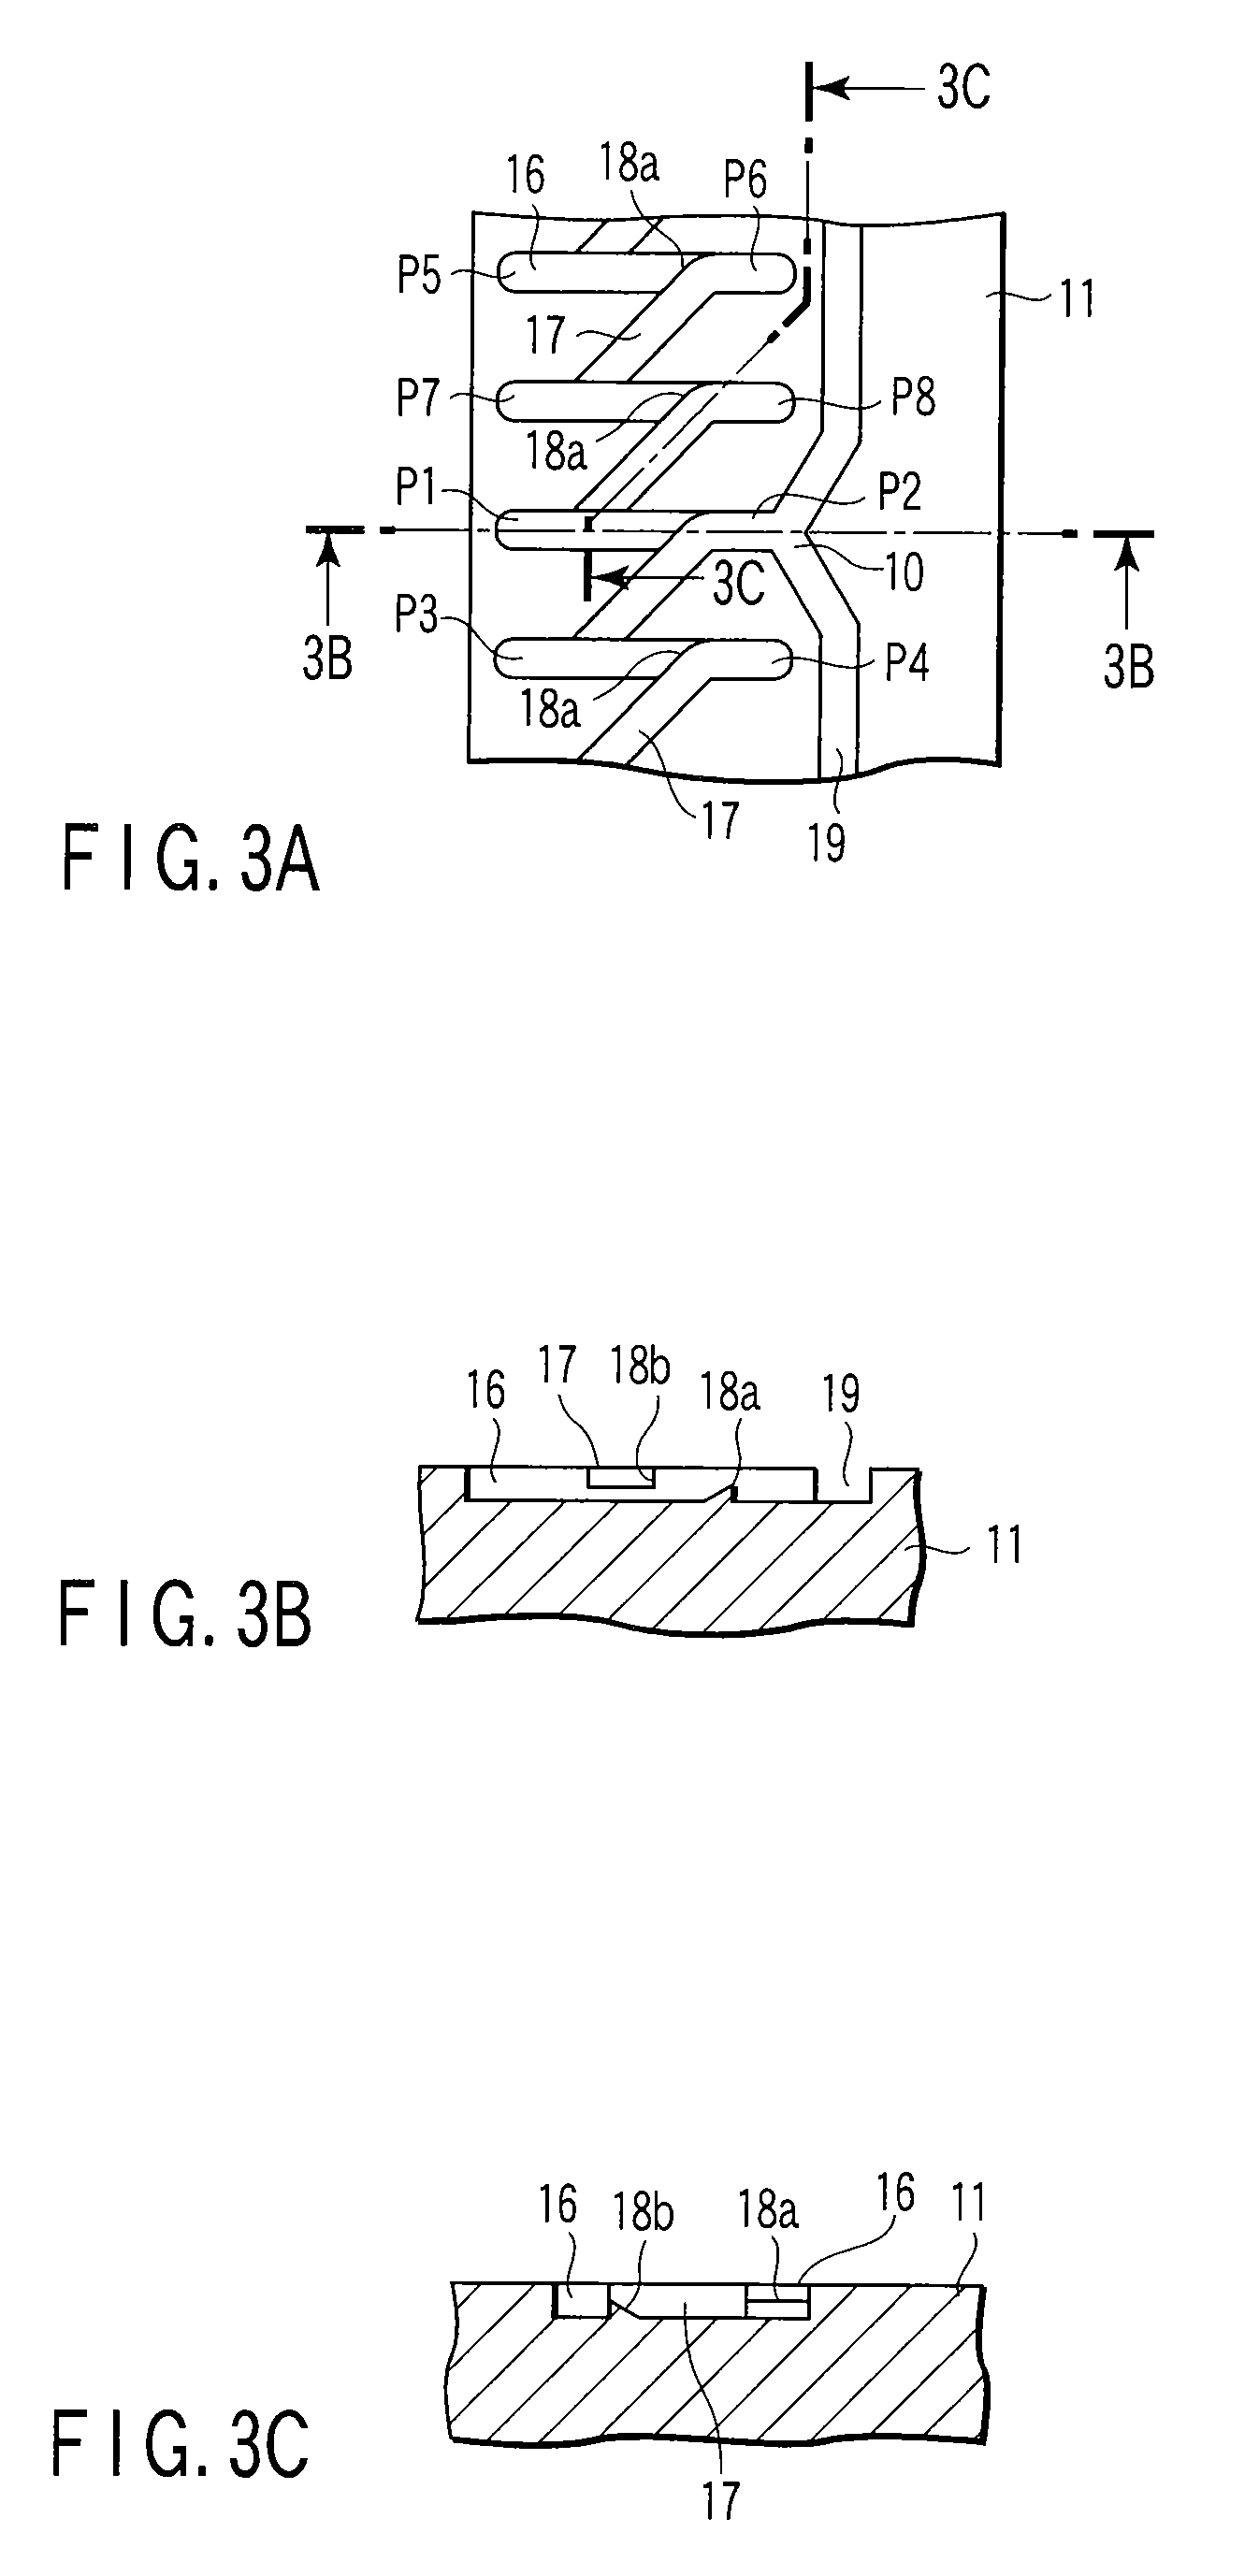 Injection needle apparatus for making injection in tissue in body cavity